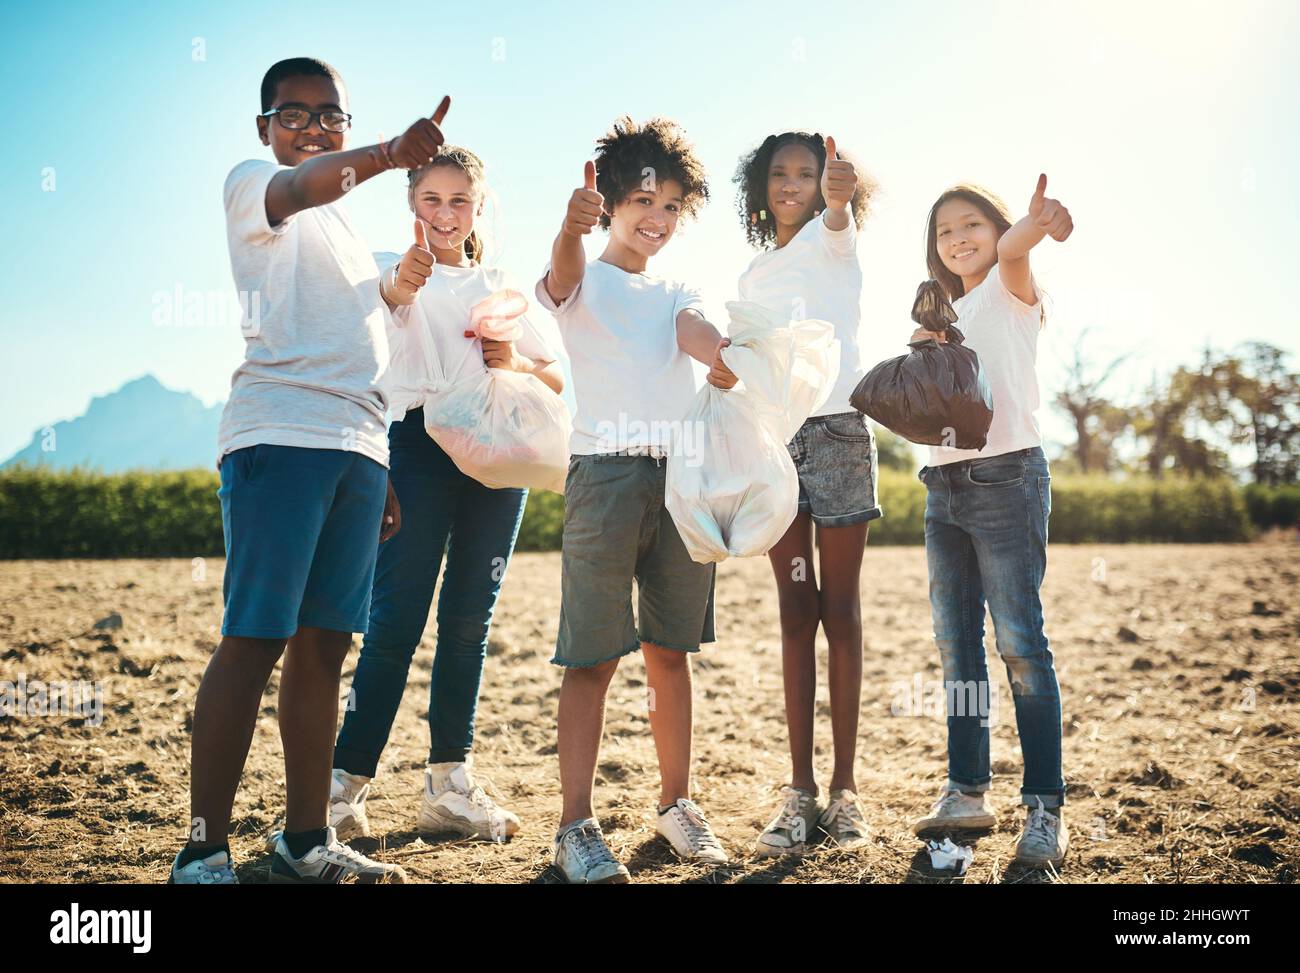 All green, all green, all good. Shot of a group of teenagers picking up litter off a field and showing thumbs up at summer camp. Stock Photo